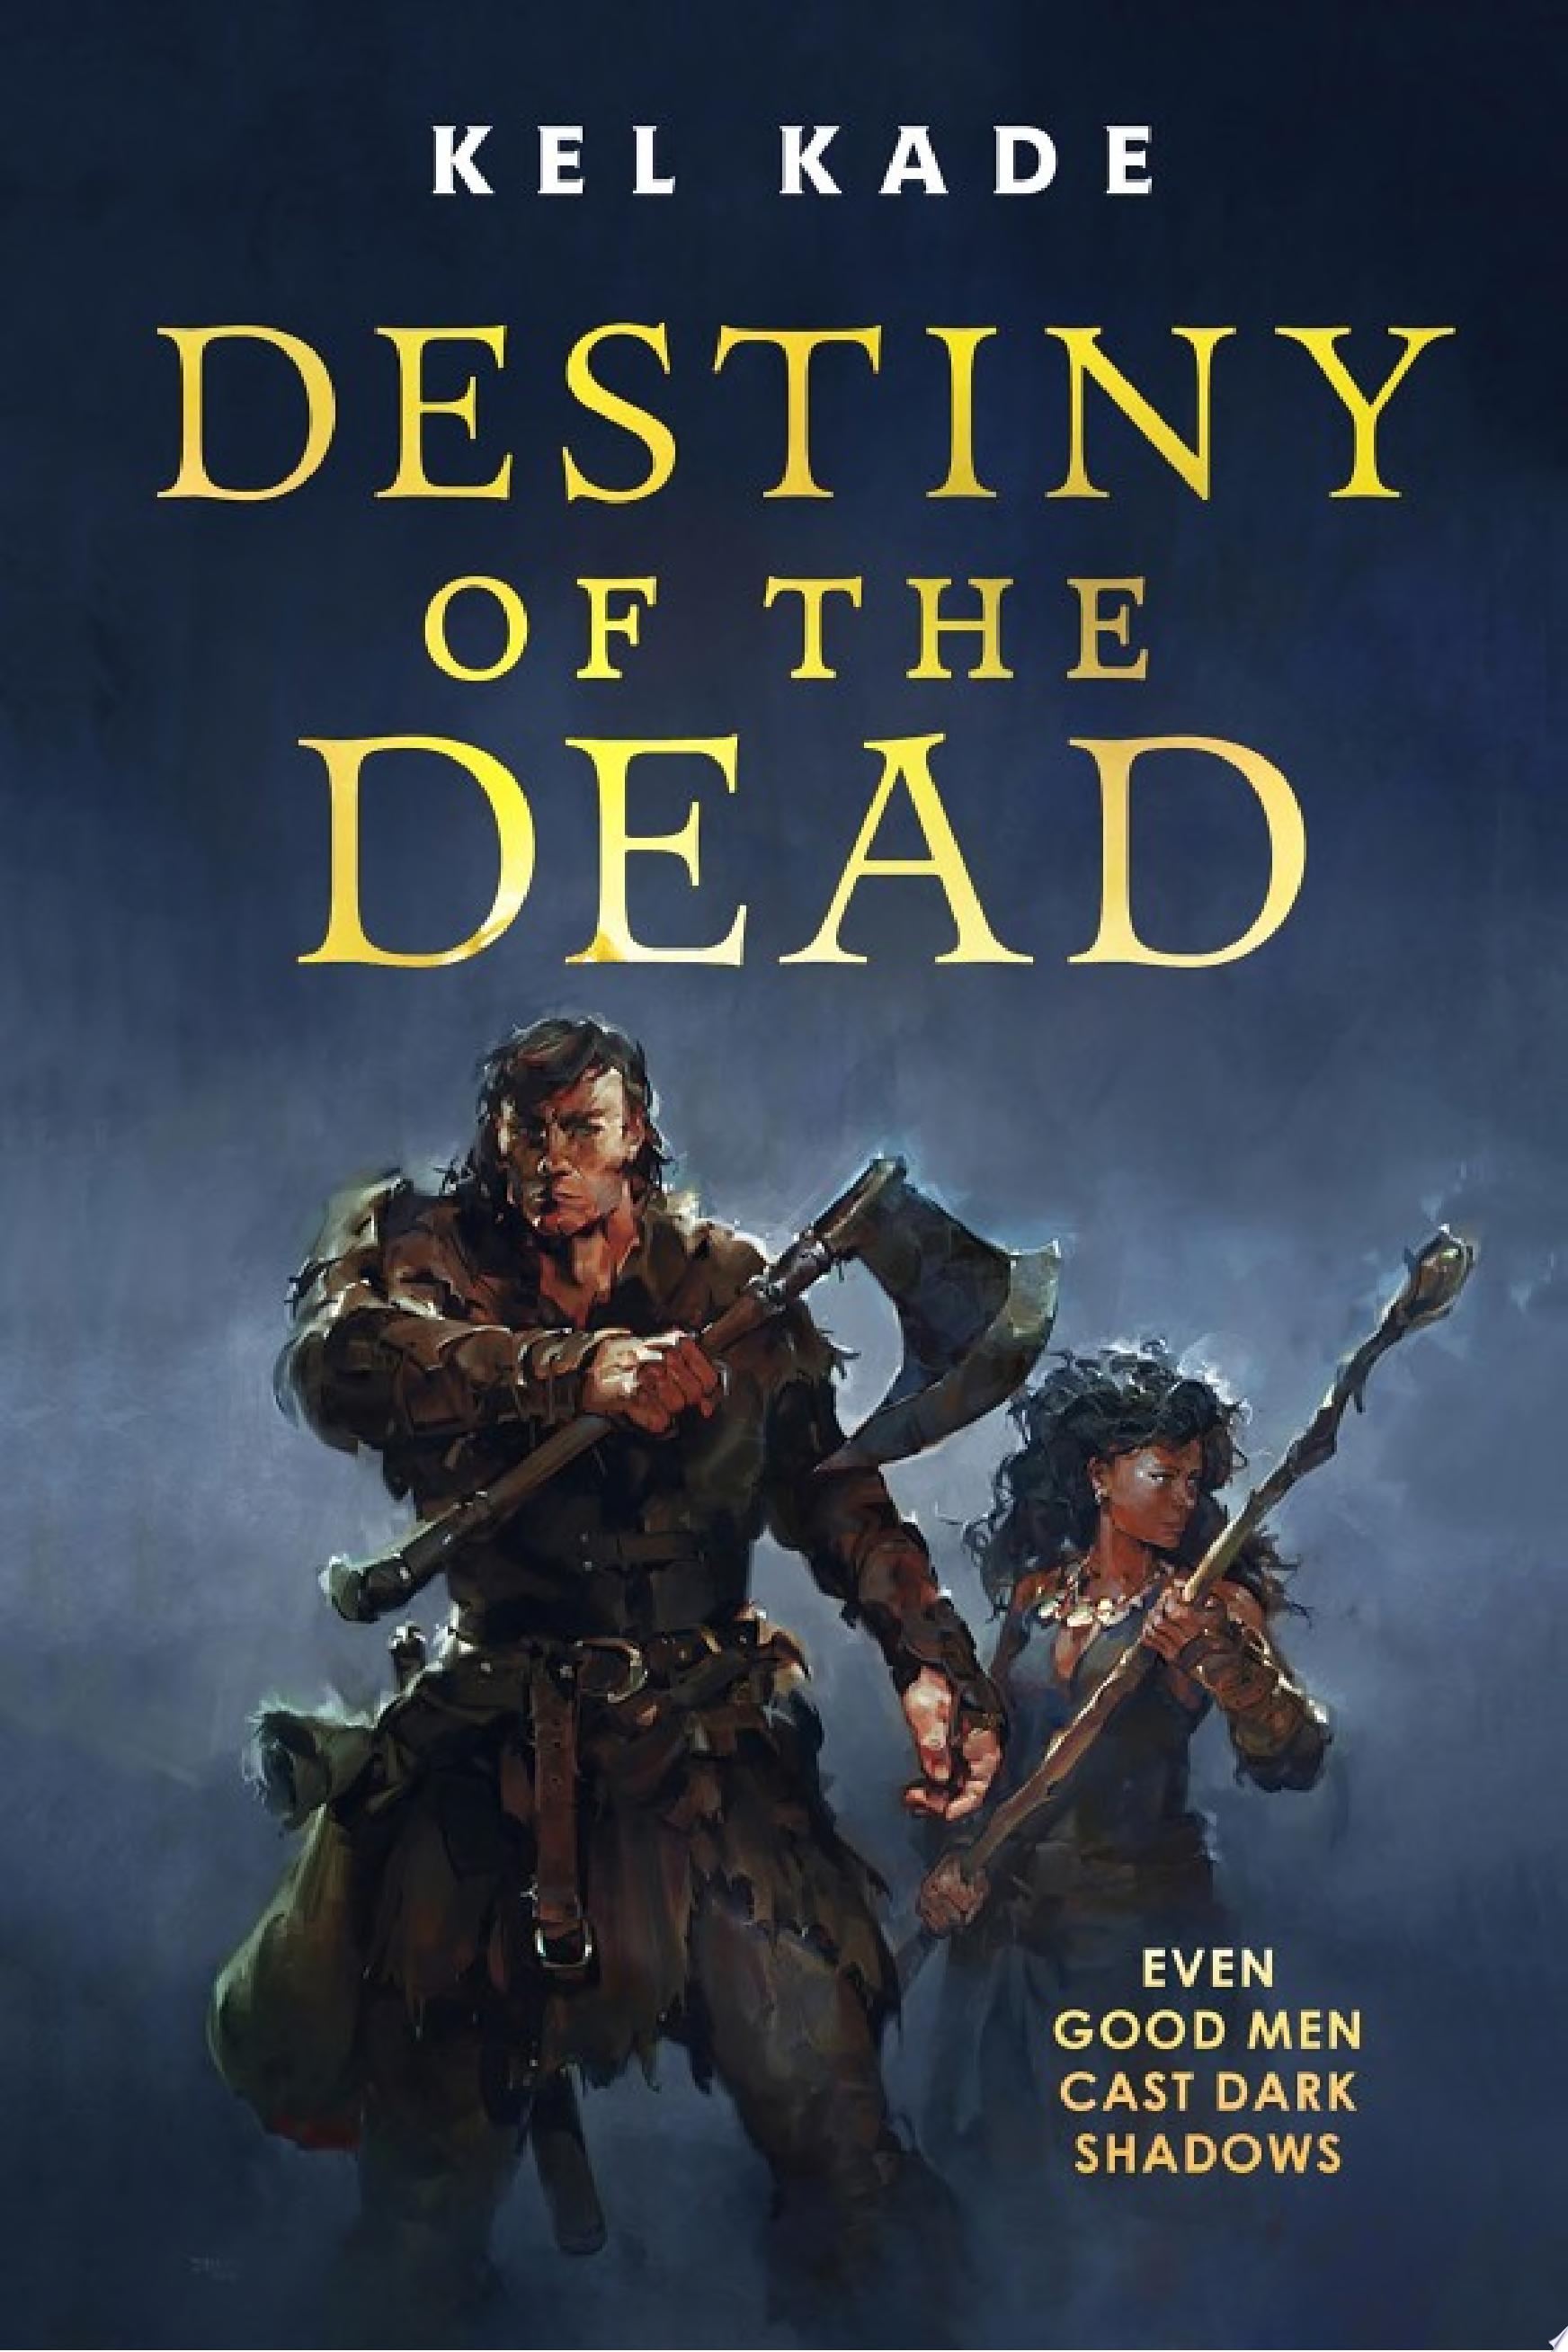 Image for "Destiny of the Dead"